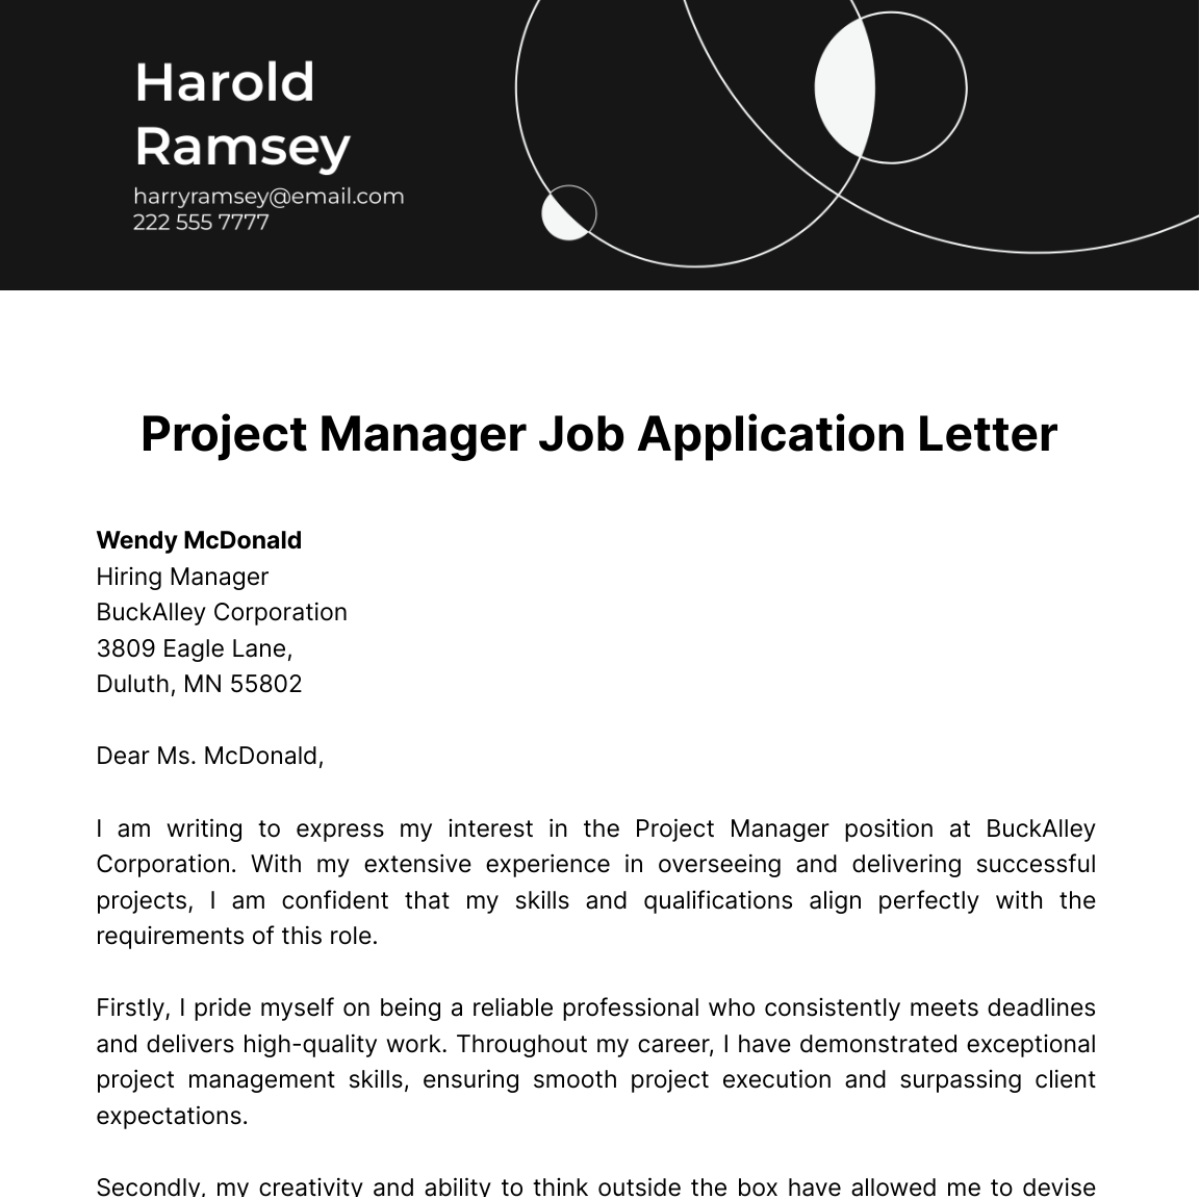 Project Manager Job Application Letter  Template